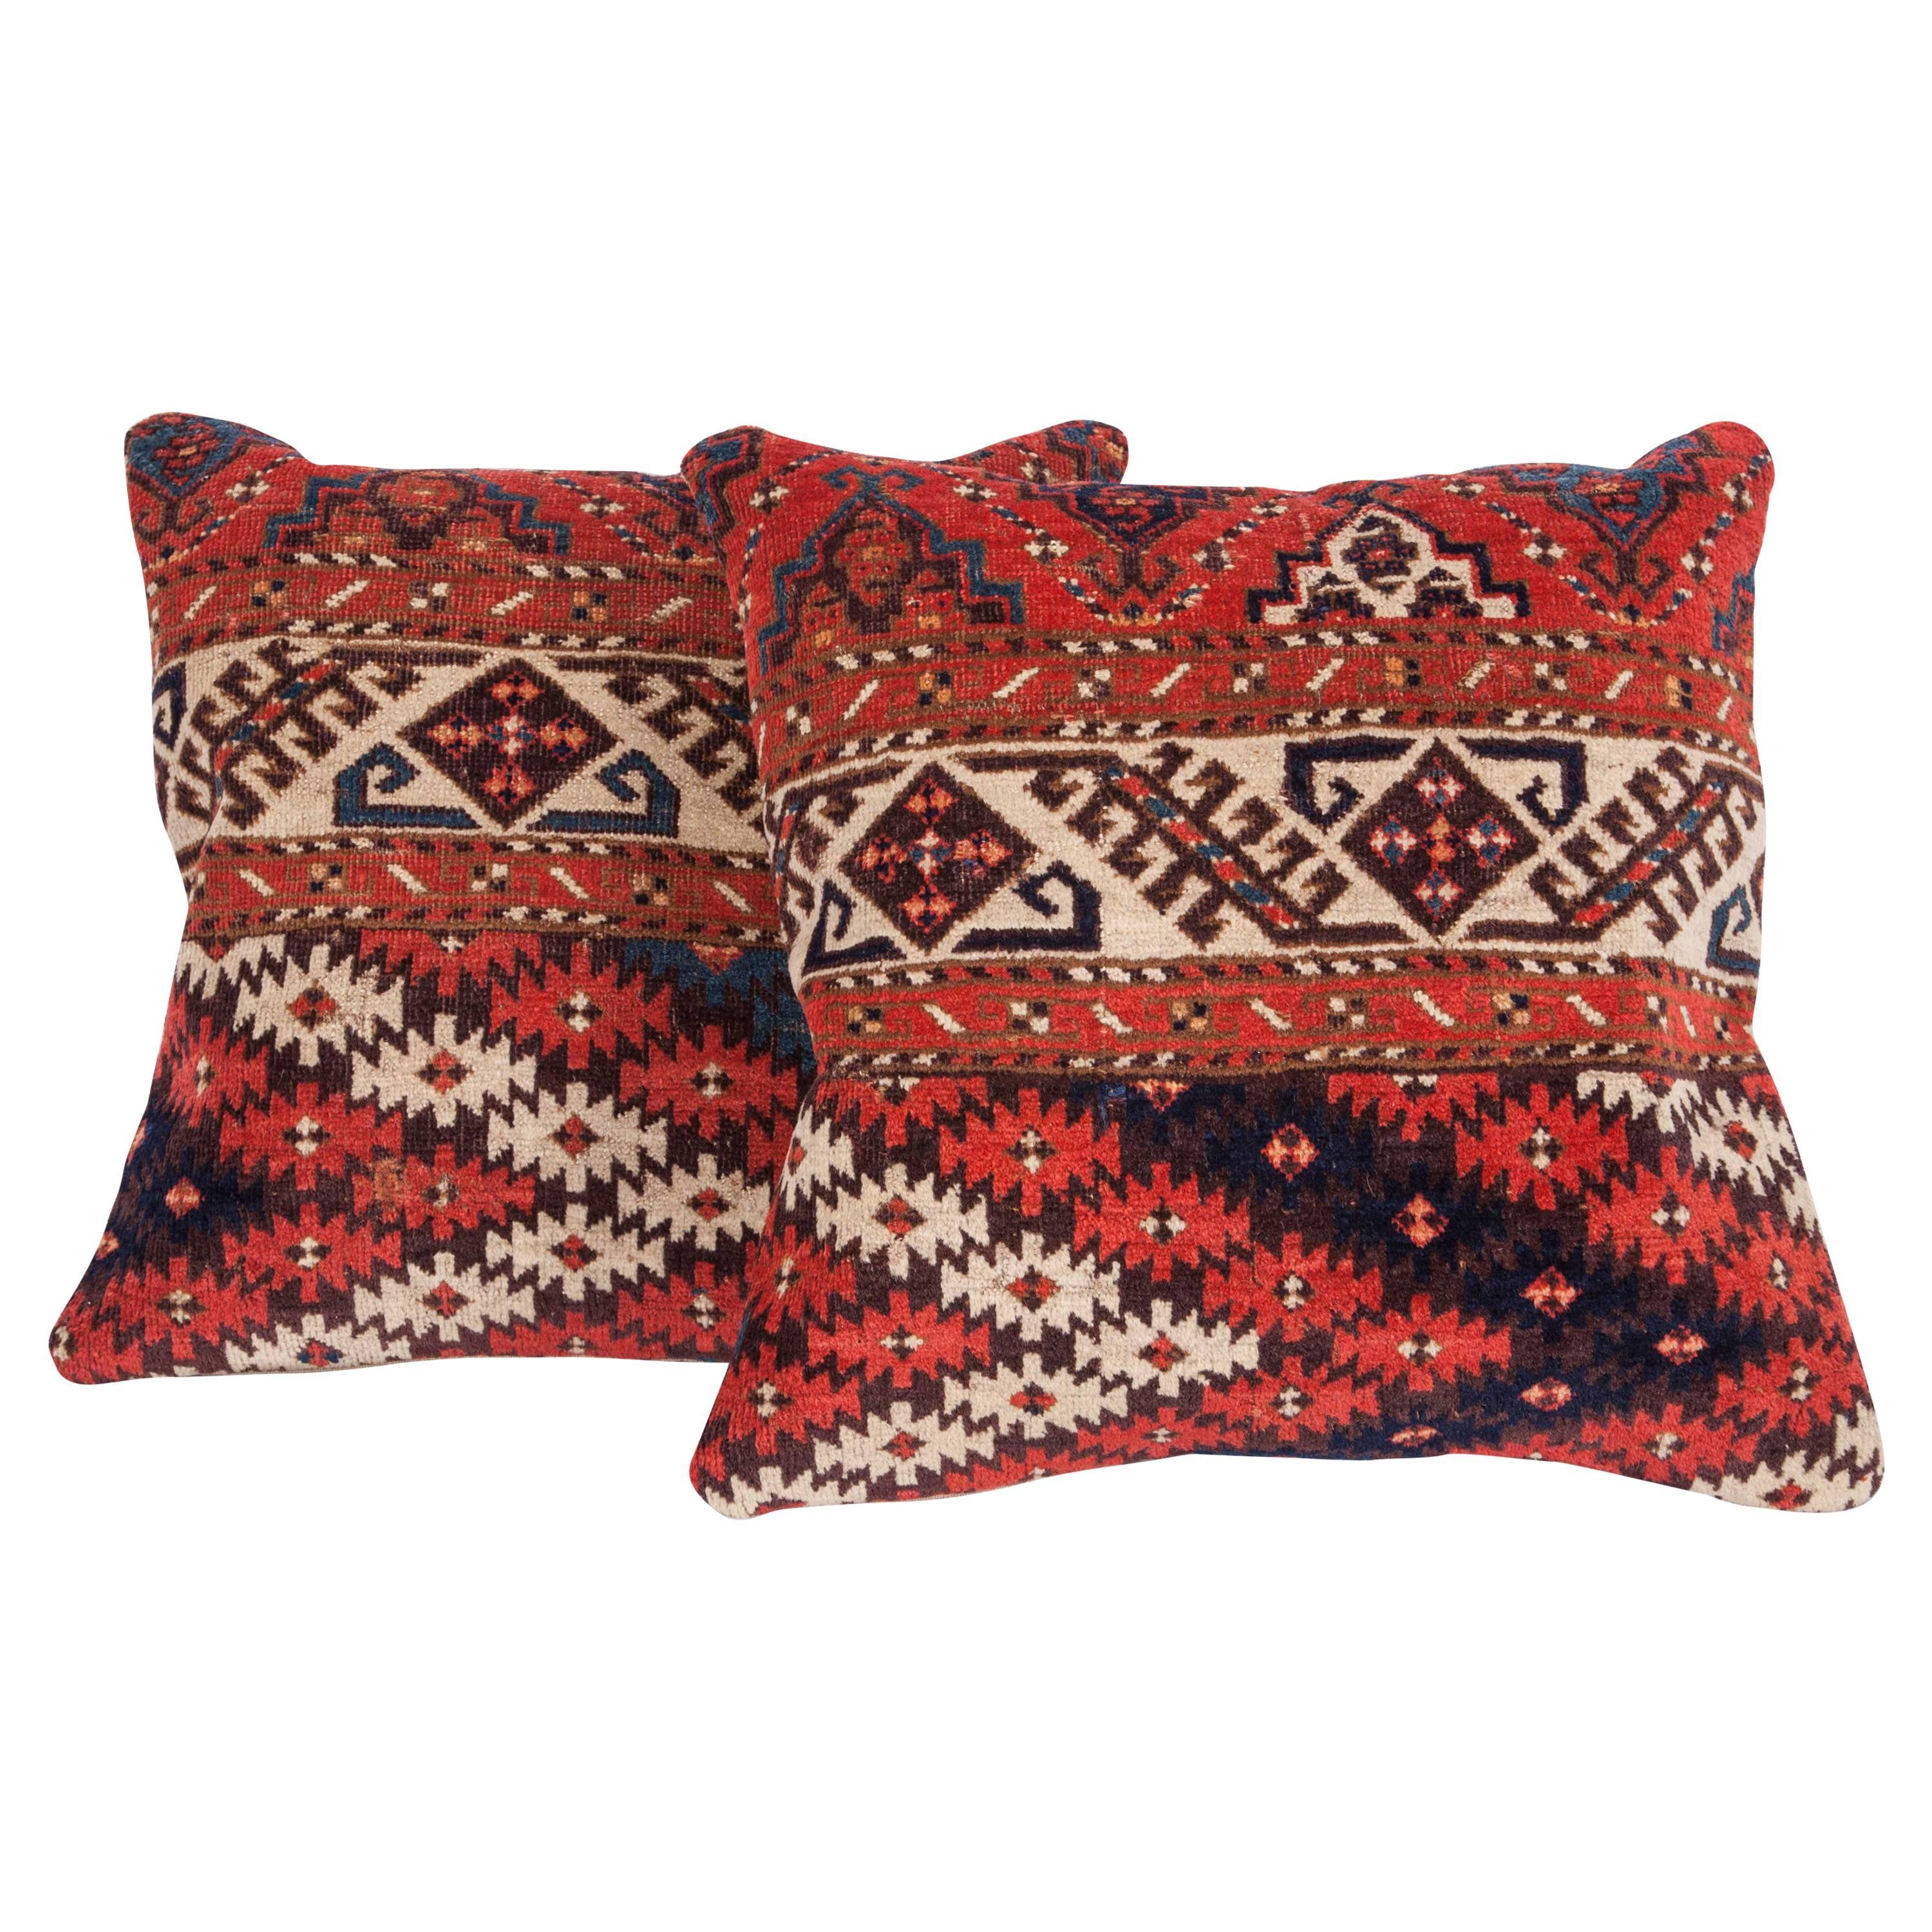 Pillows Made Out of a 19th Century Turkmen Chodor Tribe Main Rug Fragment